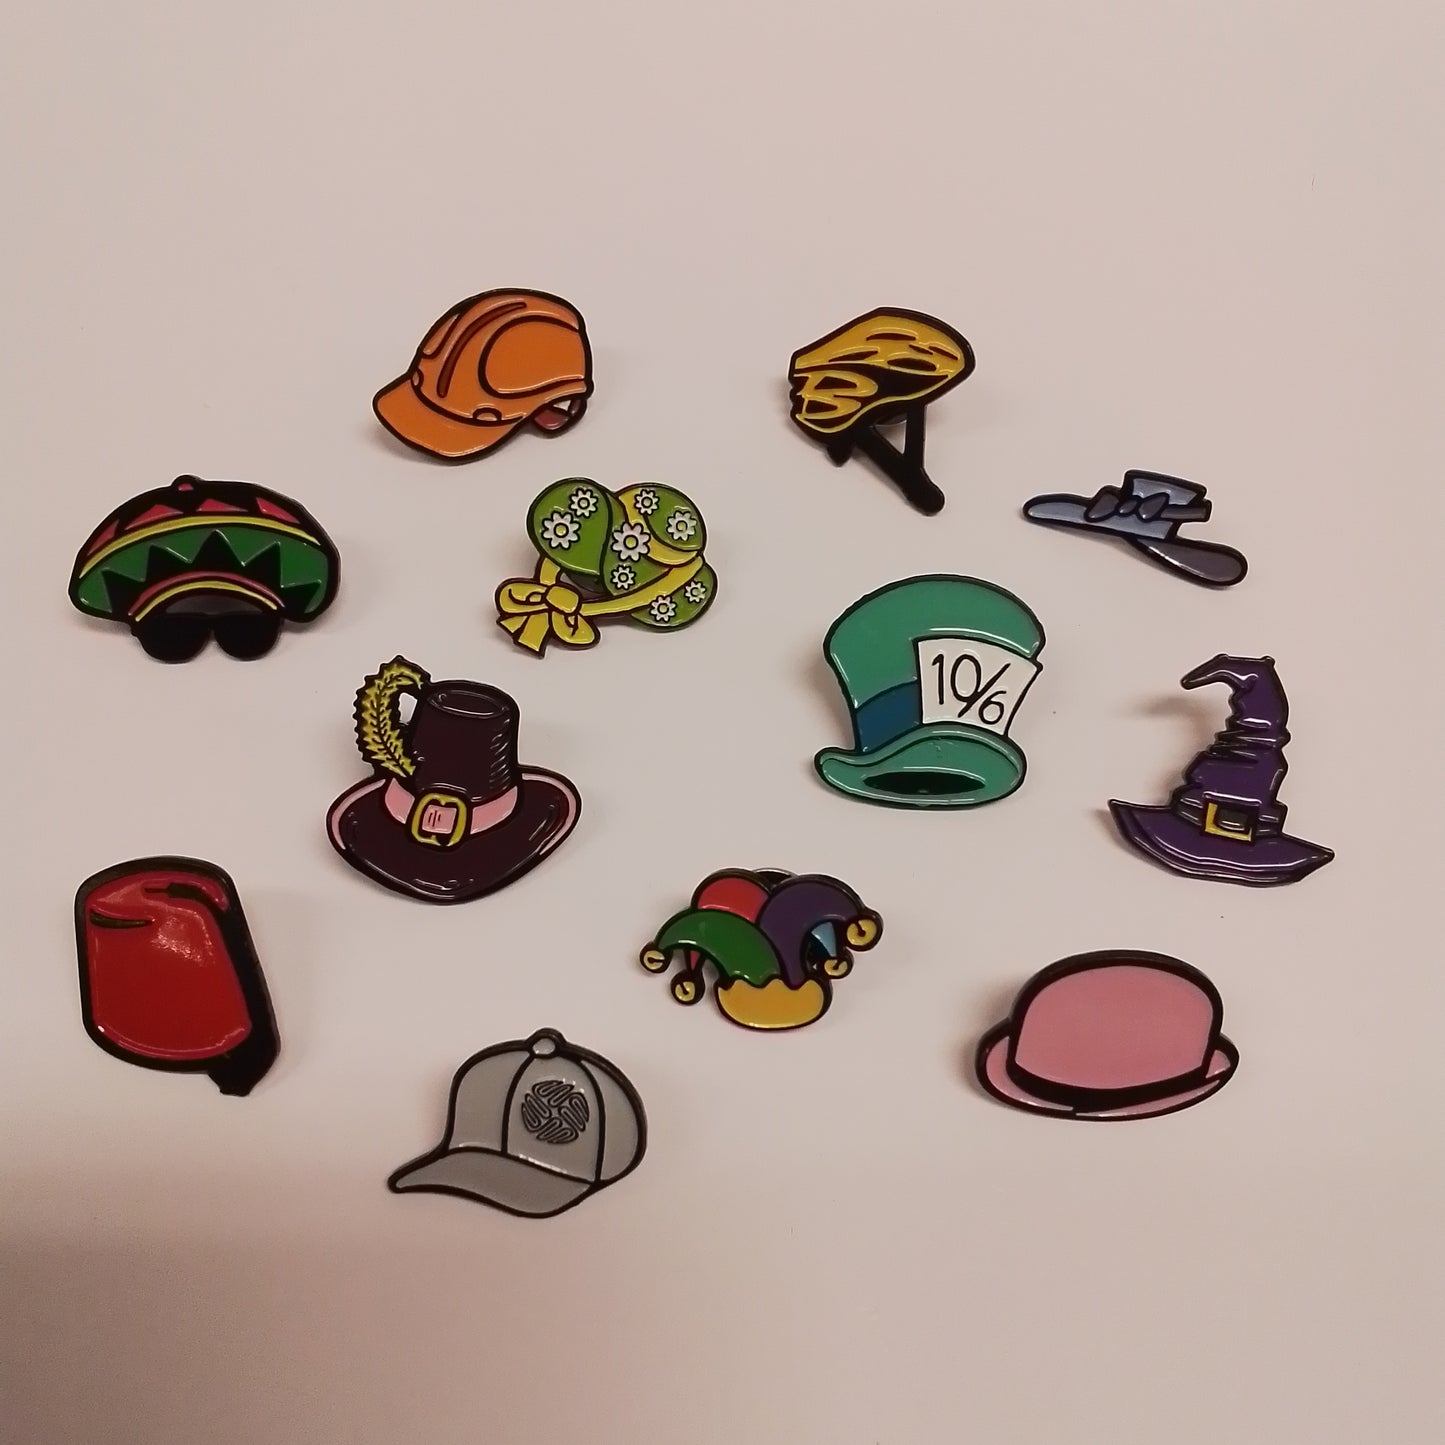 WAHD24 pin badges - mixed box of 24 - Style B - Contents: 2 x each of: Ascot 2016. Builder. Cyclist. Easter Bonnet. Fez. Grey baseball cap. Guy Fawkes. Jester.Mad Hatter. Pink Bowler. Rasta. Wizard